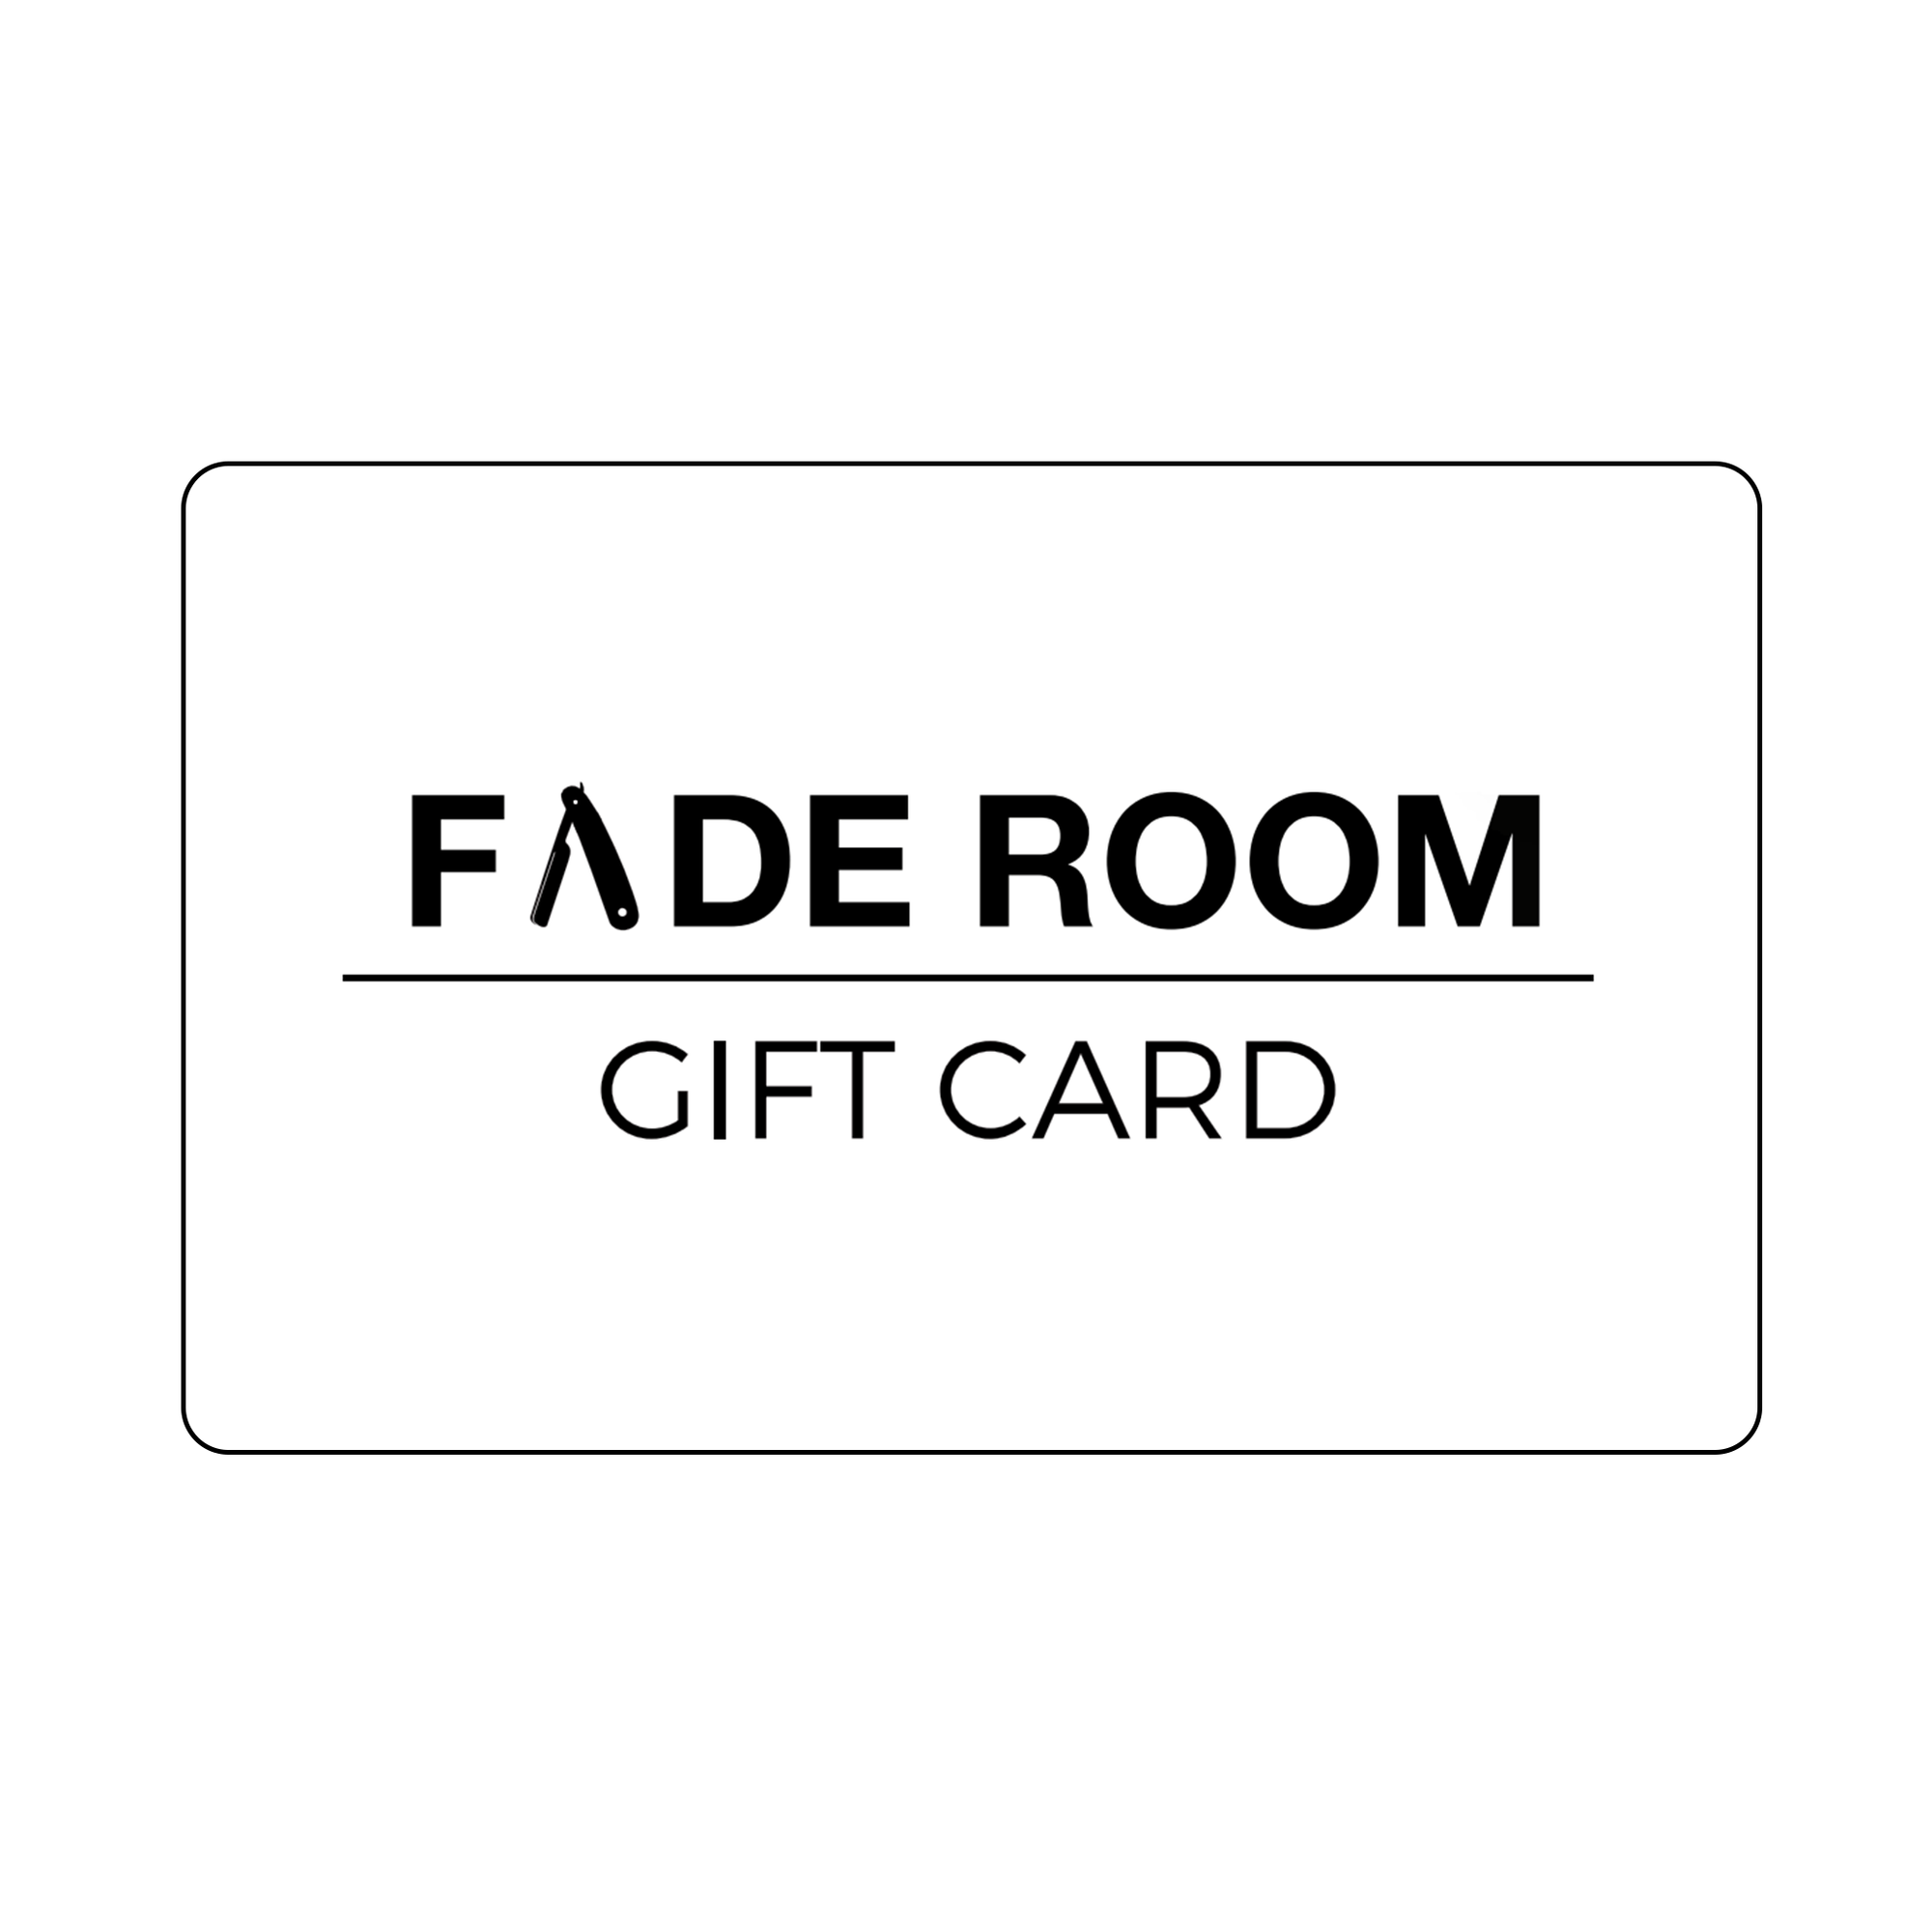 Fade Room Online Store Gift Card